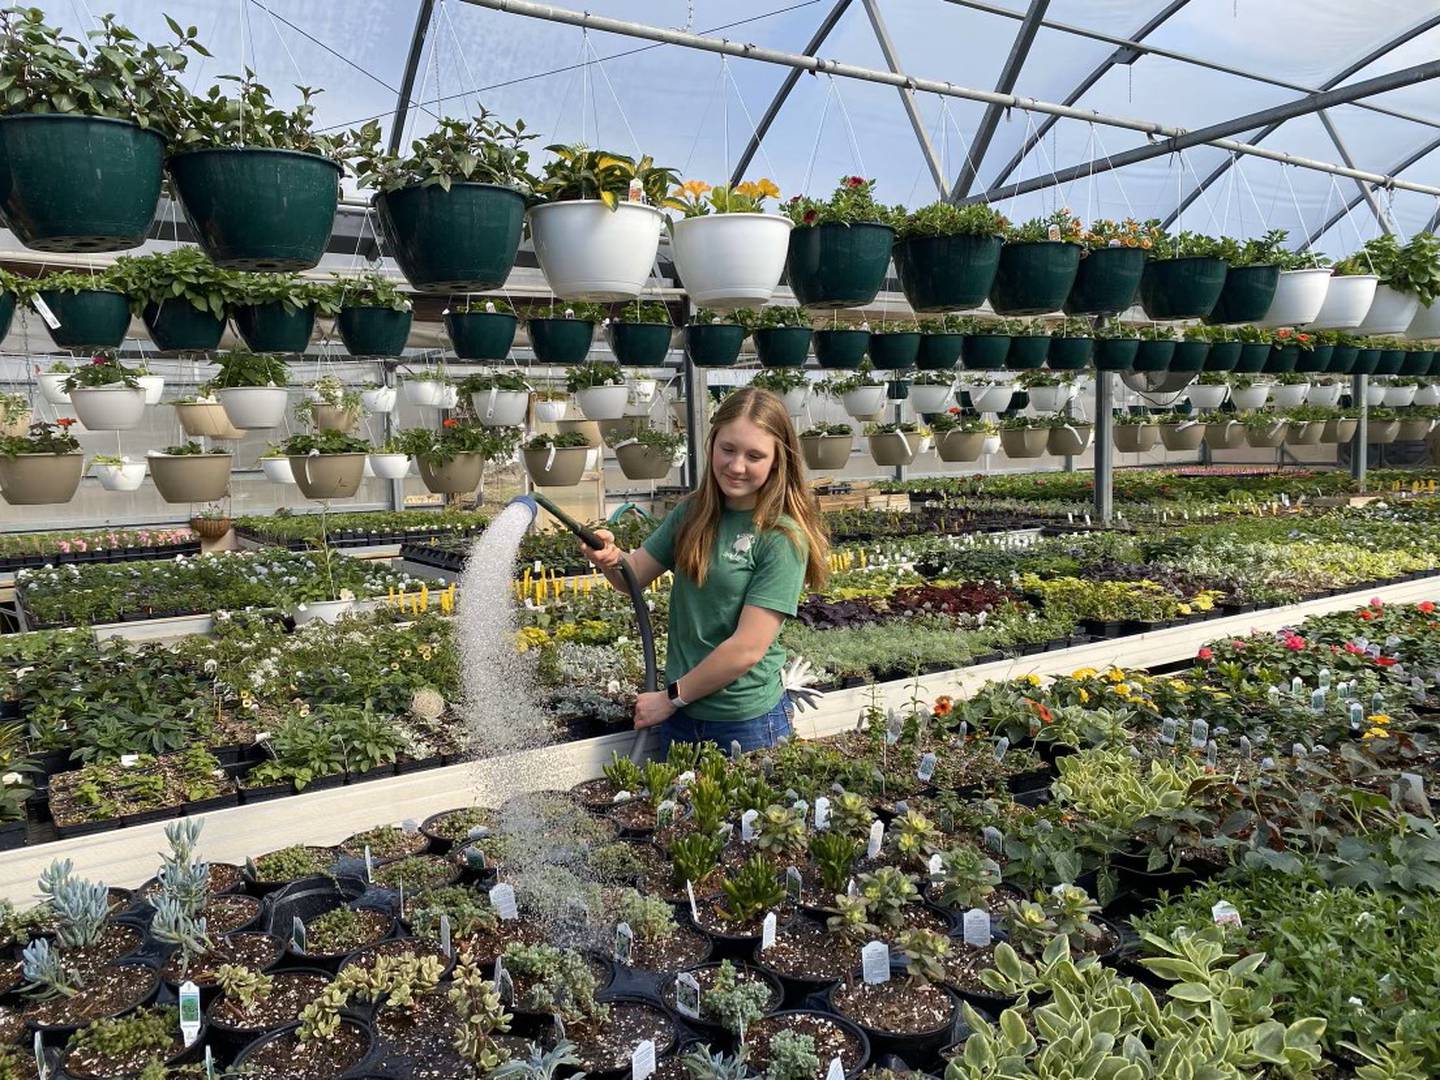 Elizabeth Corrie waters plants at Boehm’s Garden Center. Additional duties include potting annuals, perennials, shrubs and houseplants and assisting customers.